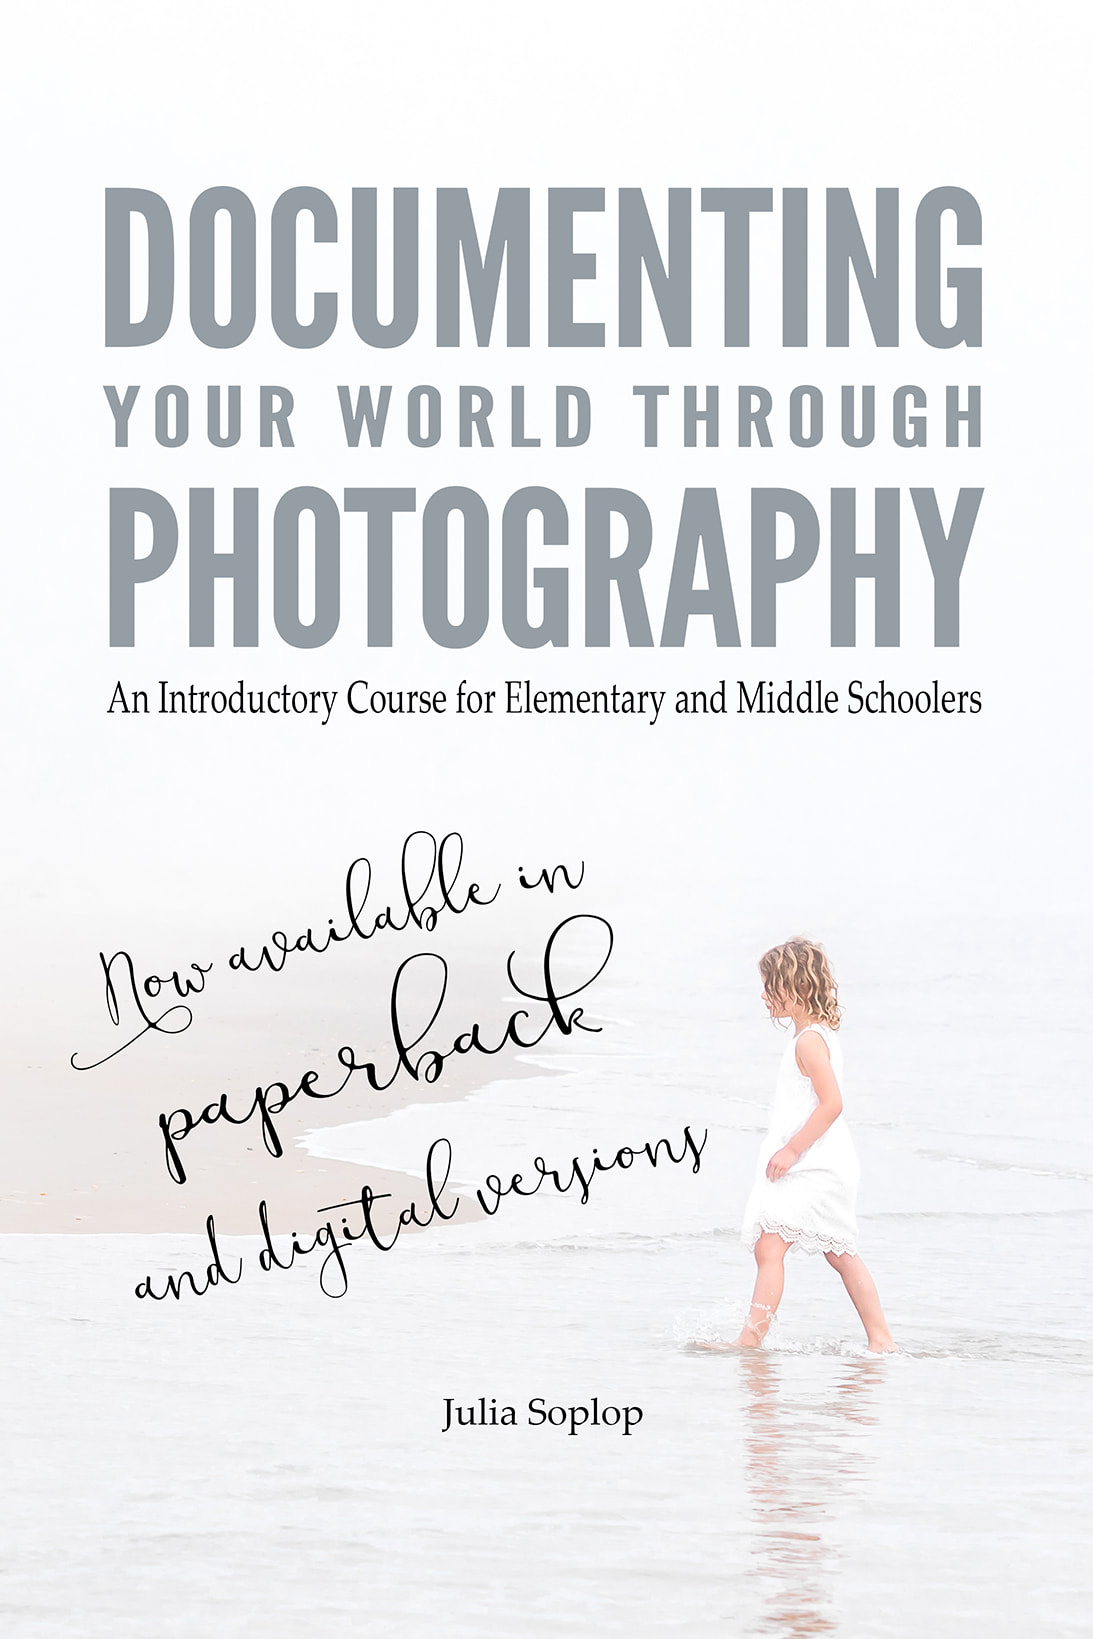 Documenting Your World Through Photography: An Introductory Course for Elementary and Middler Schoolers. For kids. Now available in paperback and digital versions. By Calm Cradle Photo & Design